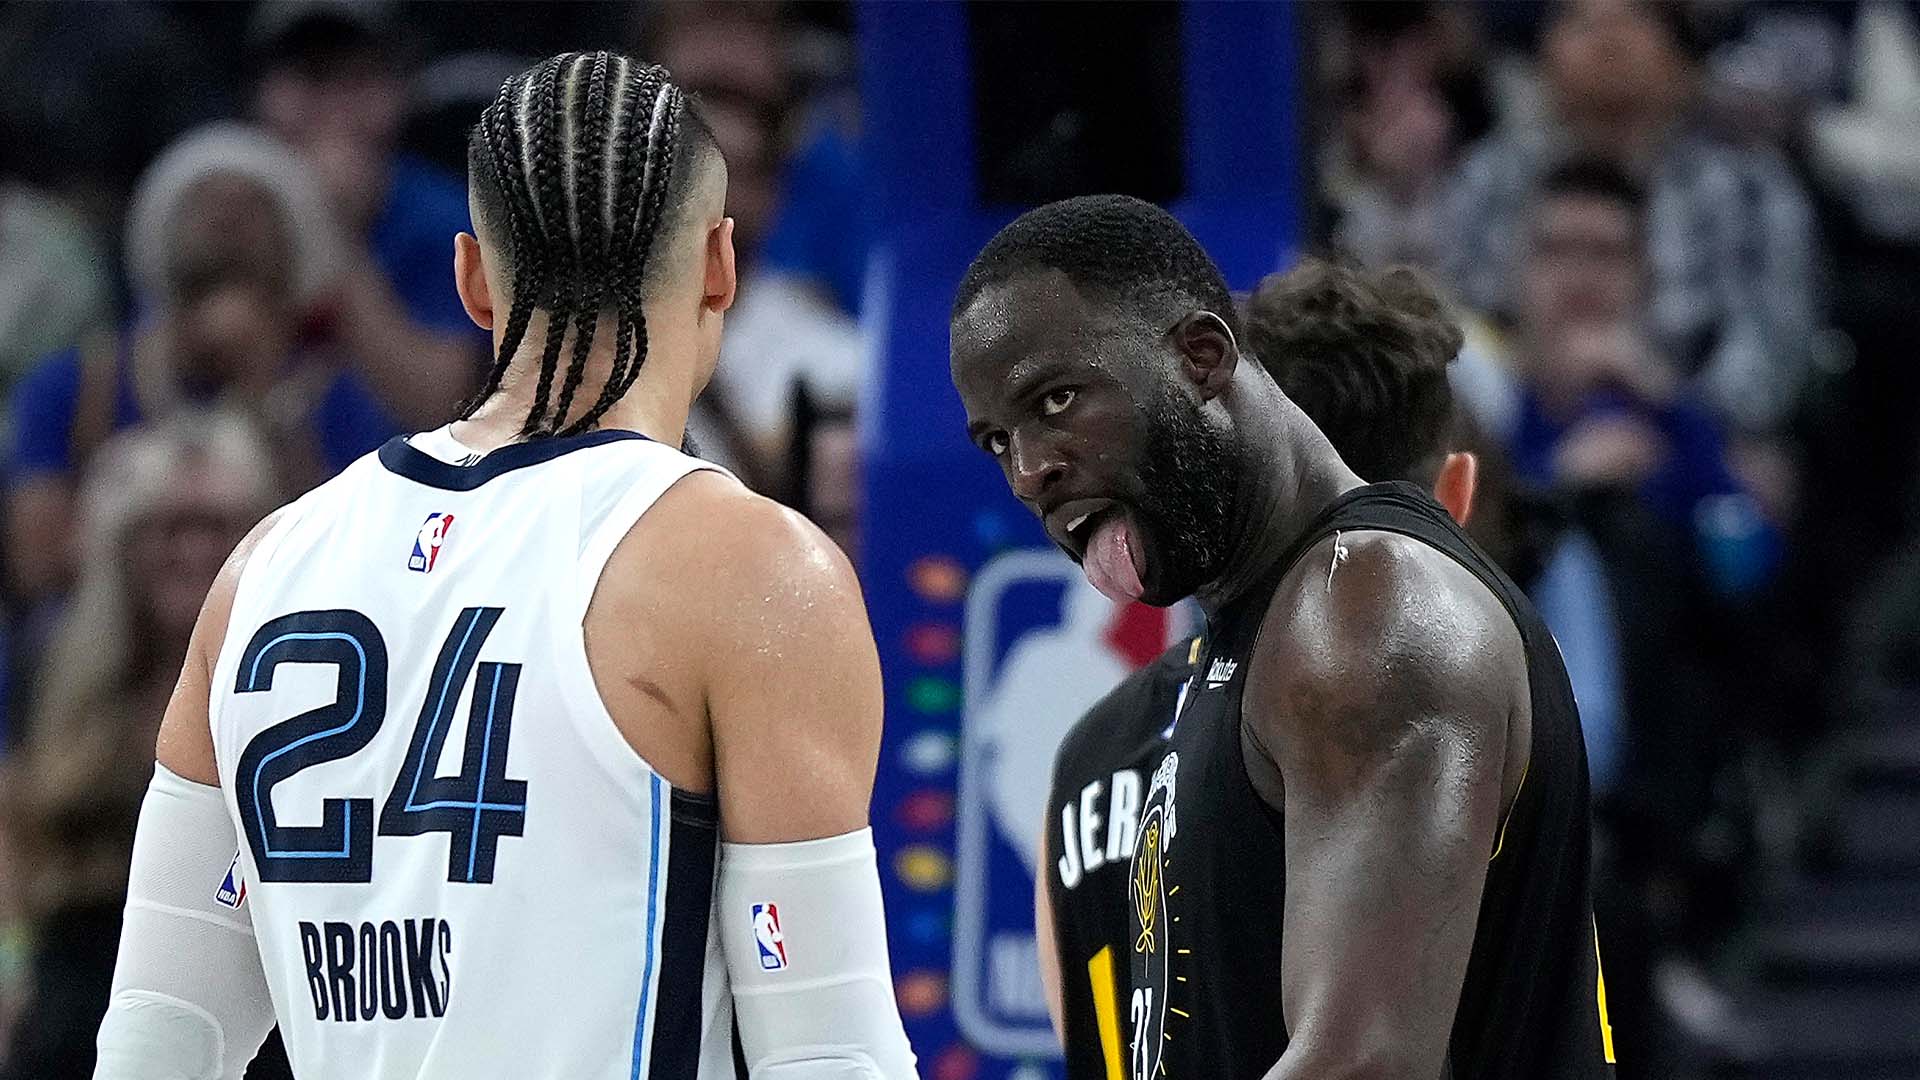 Inside Draymond Green's feud with Dillon Brooks after labeling NBA rival a 'clown' and an 'idiot'. The US Sun